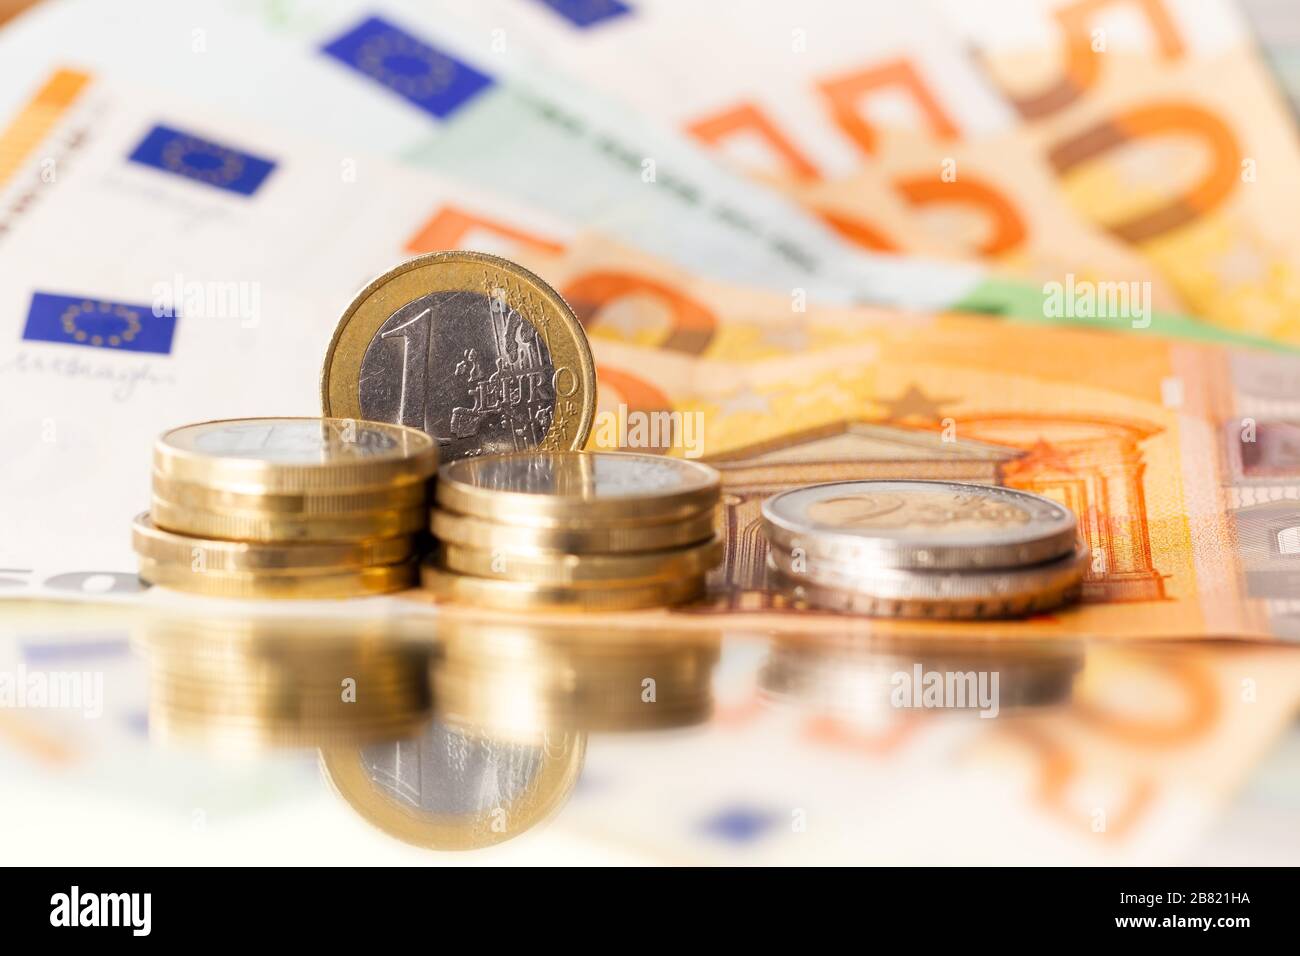 Background With Euro Banknotes. 1 Euro On The Background Of Money. One Euro  Coin. Top View Stock Photo, Picture and Royalty Free Image. Image 143187514.